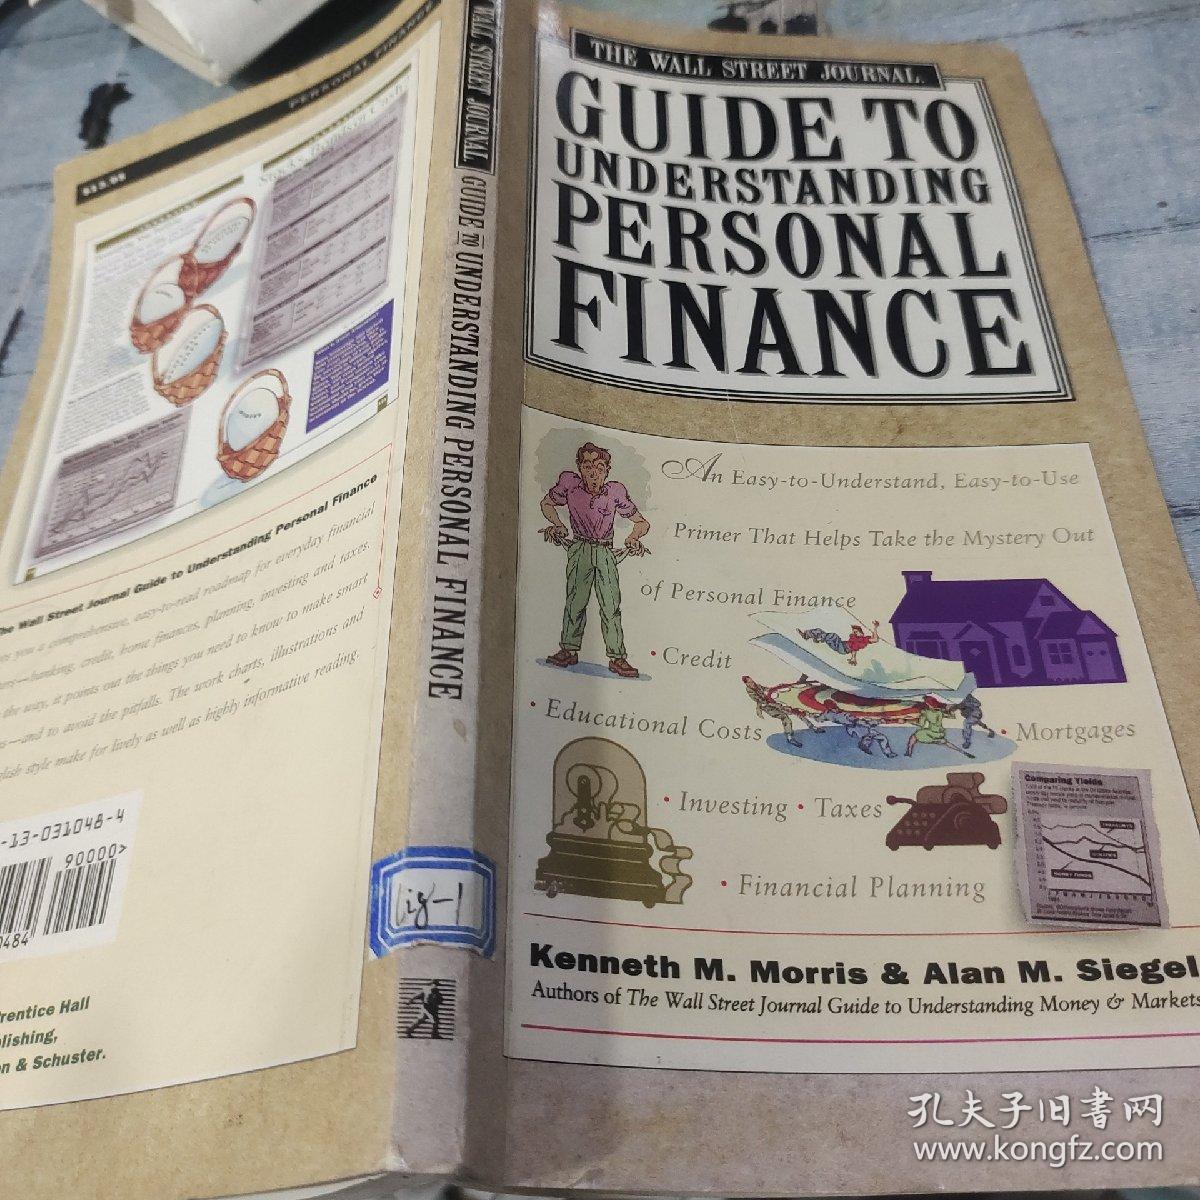 THE WALL STREET JOURNAL
GUIDE TO
UNDERSTANDING
PERSONAL FINANCE